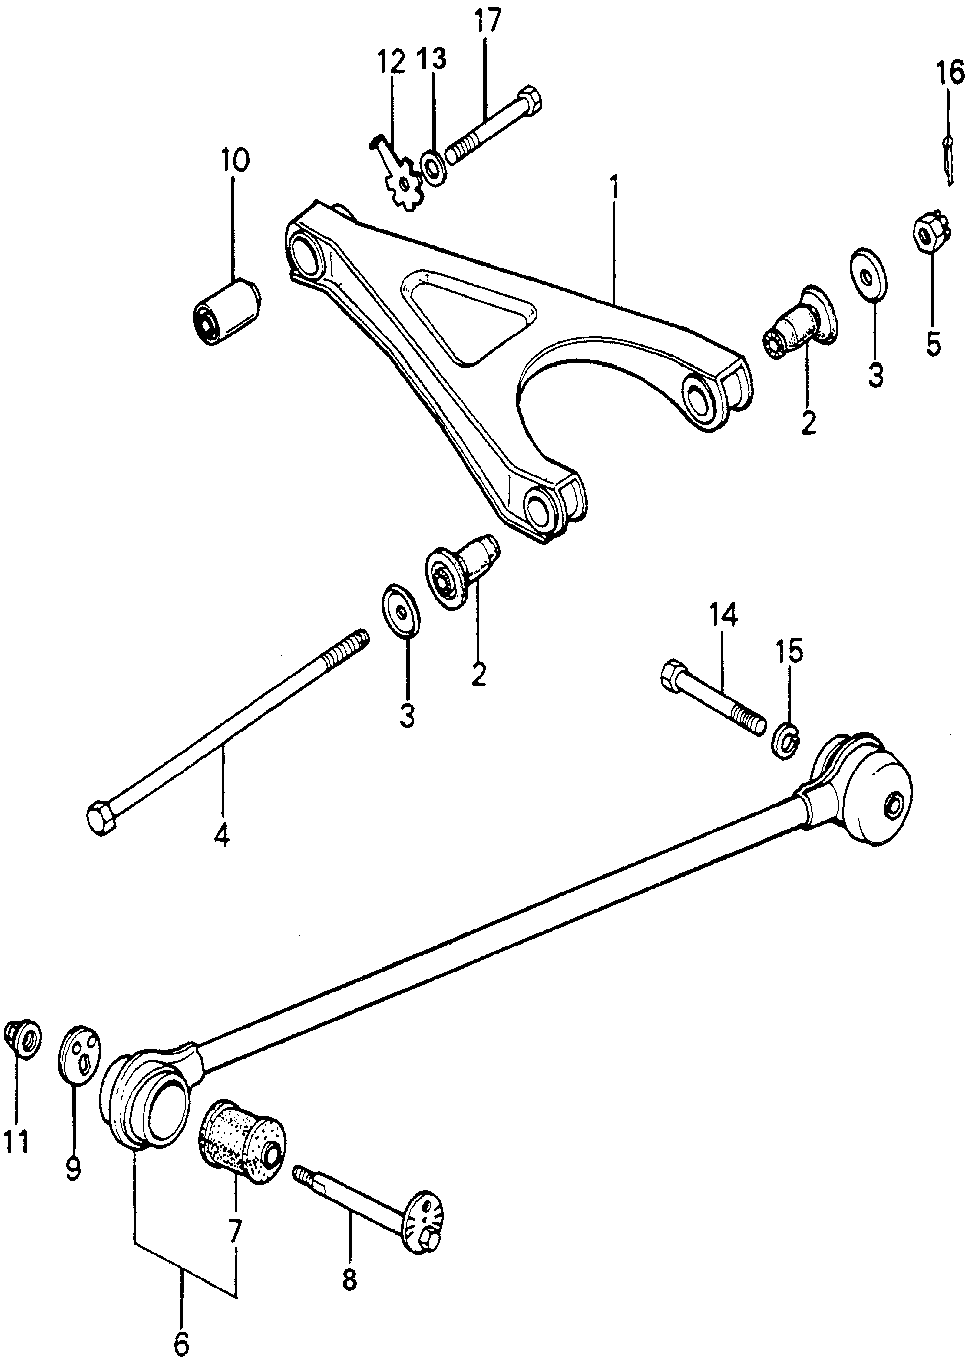 90502-689-000 - WASHER, ARM (LOWER)